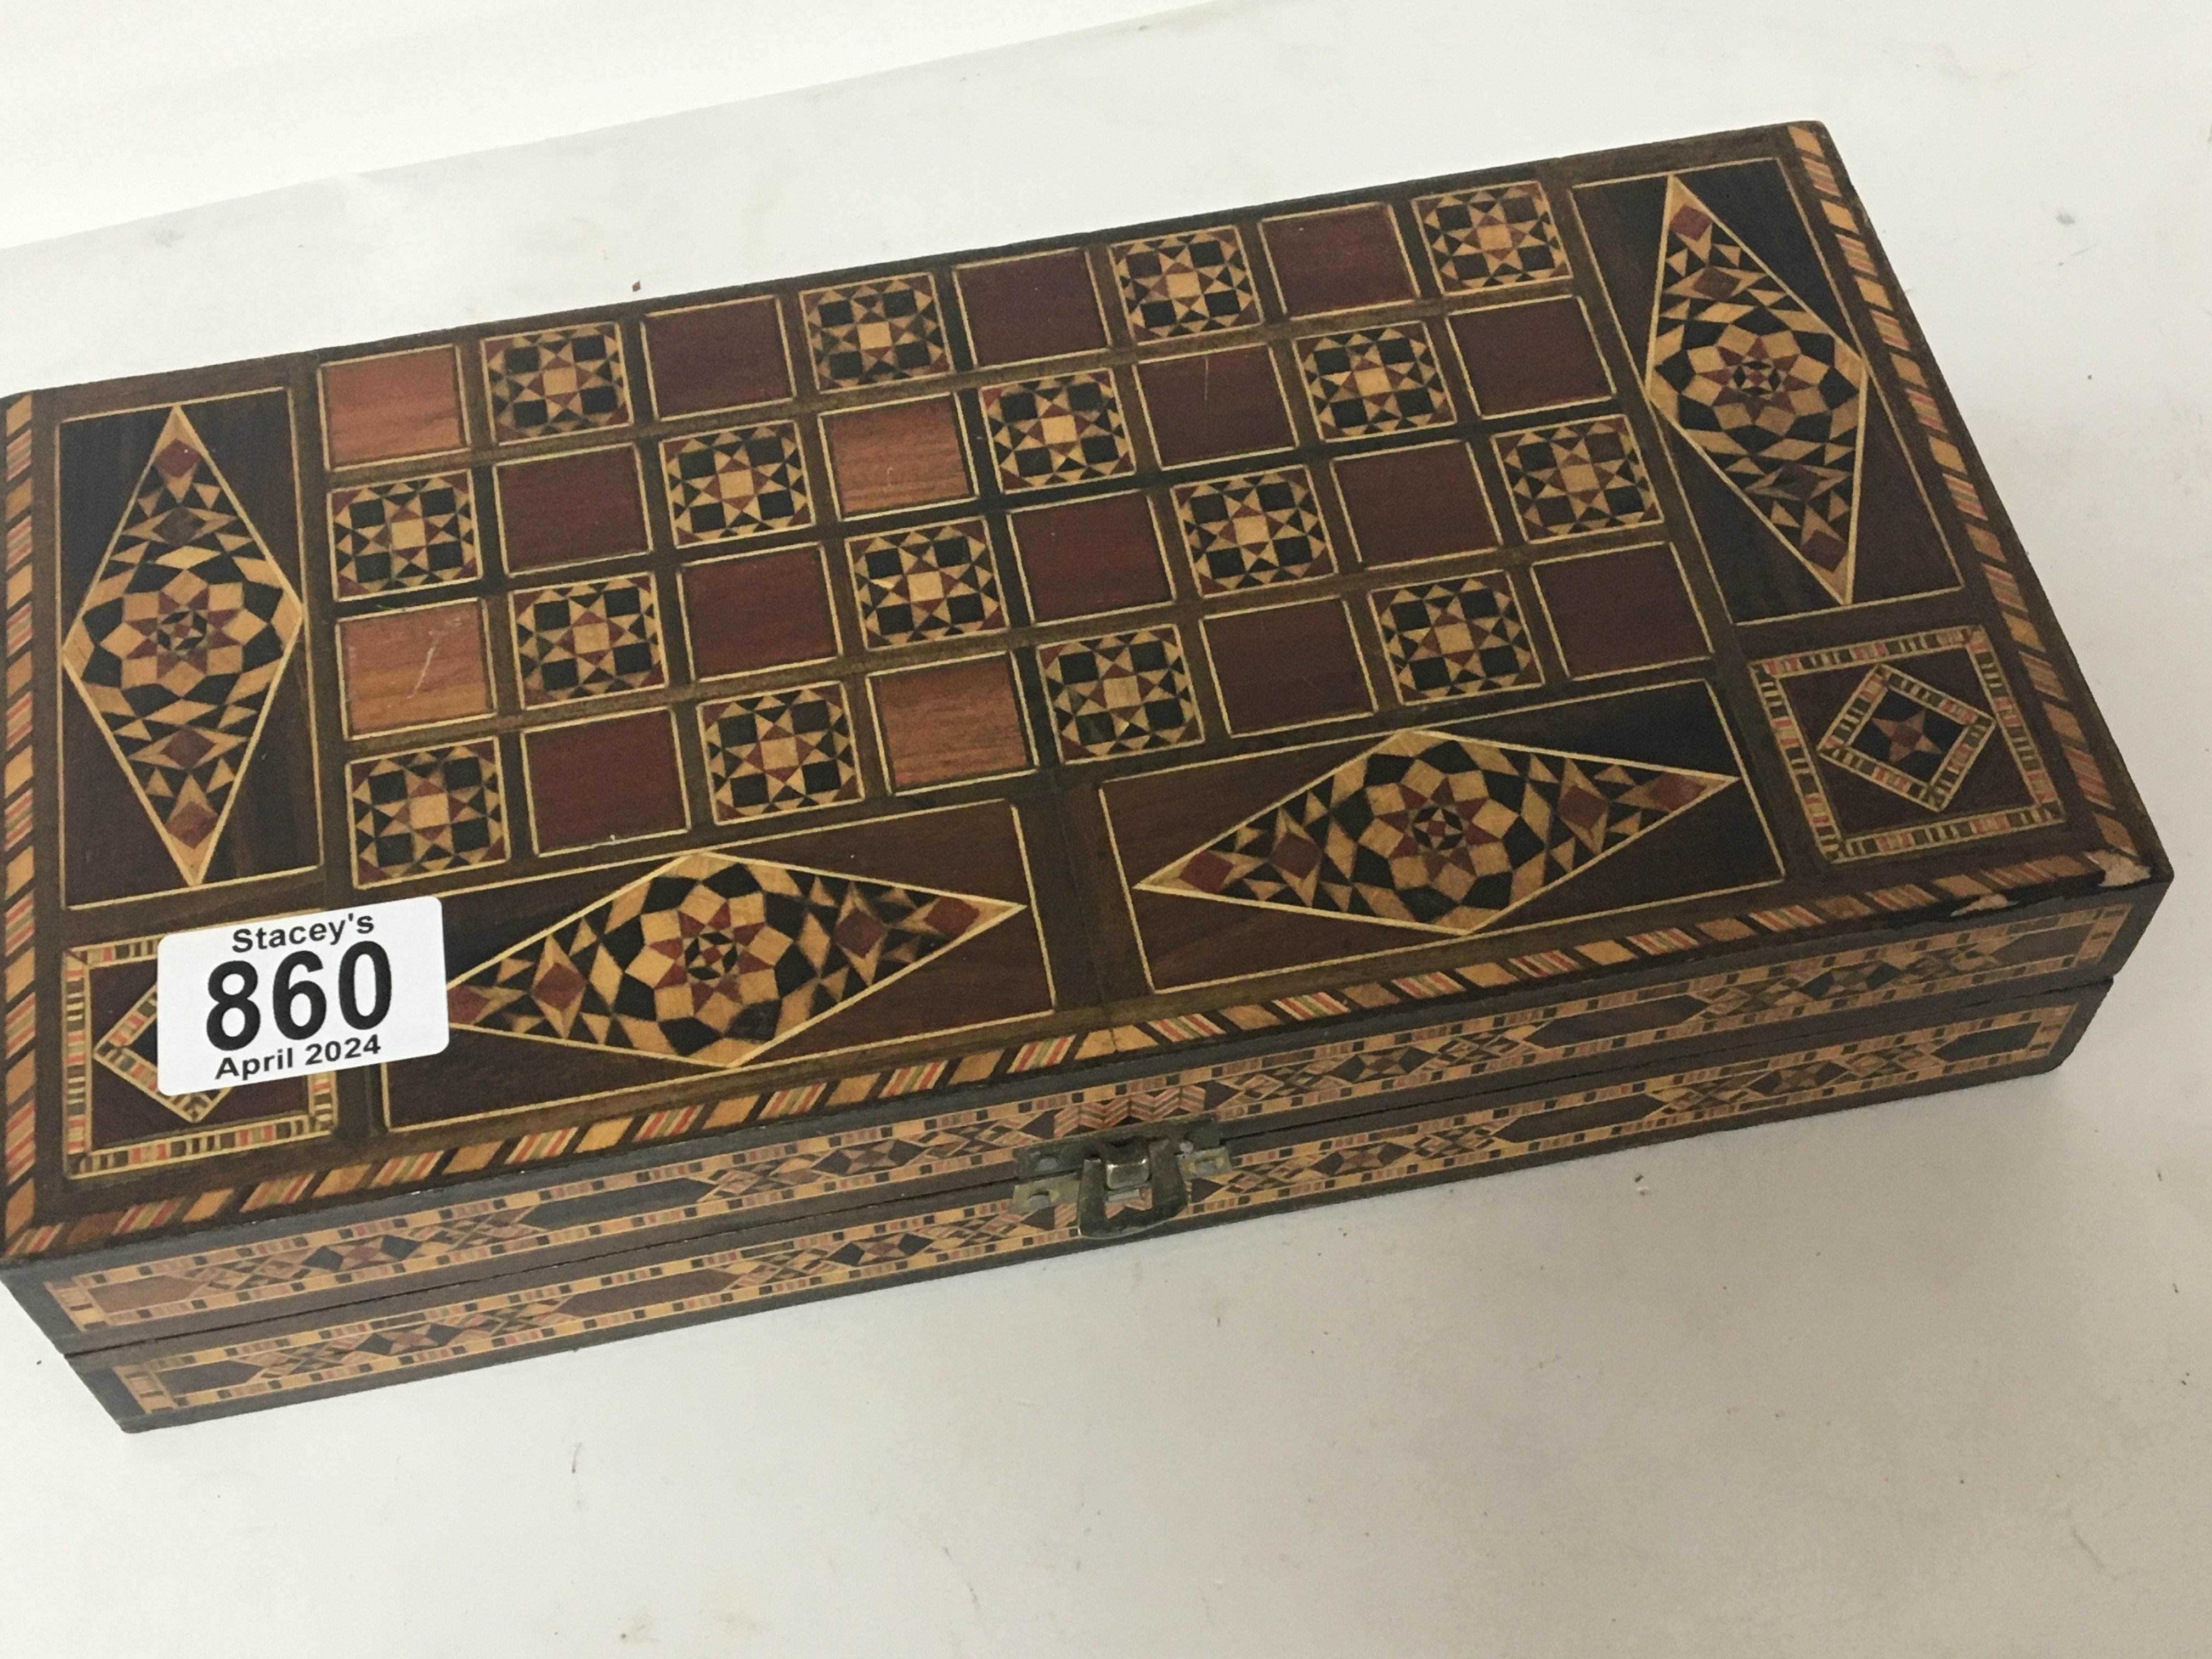 A Damascus type games box with a patterned interio - Image 2 of 2